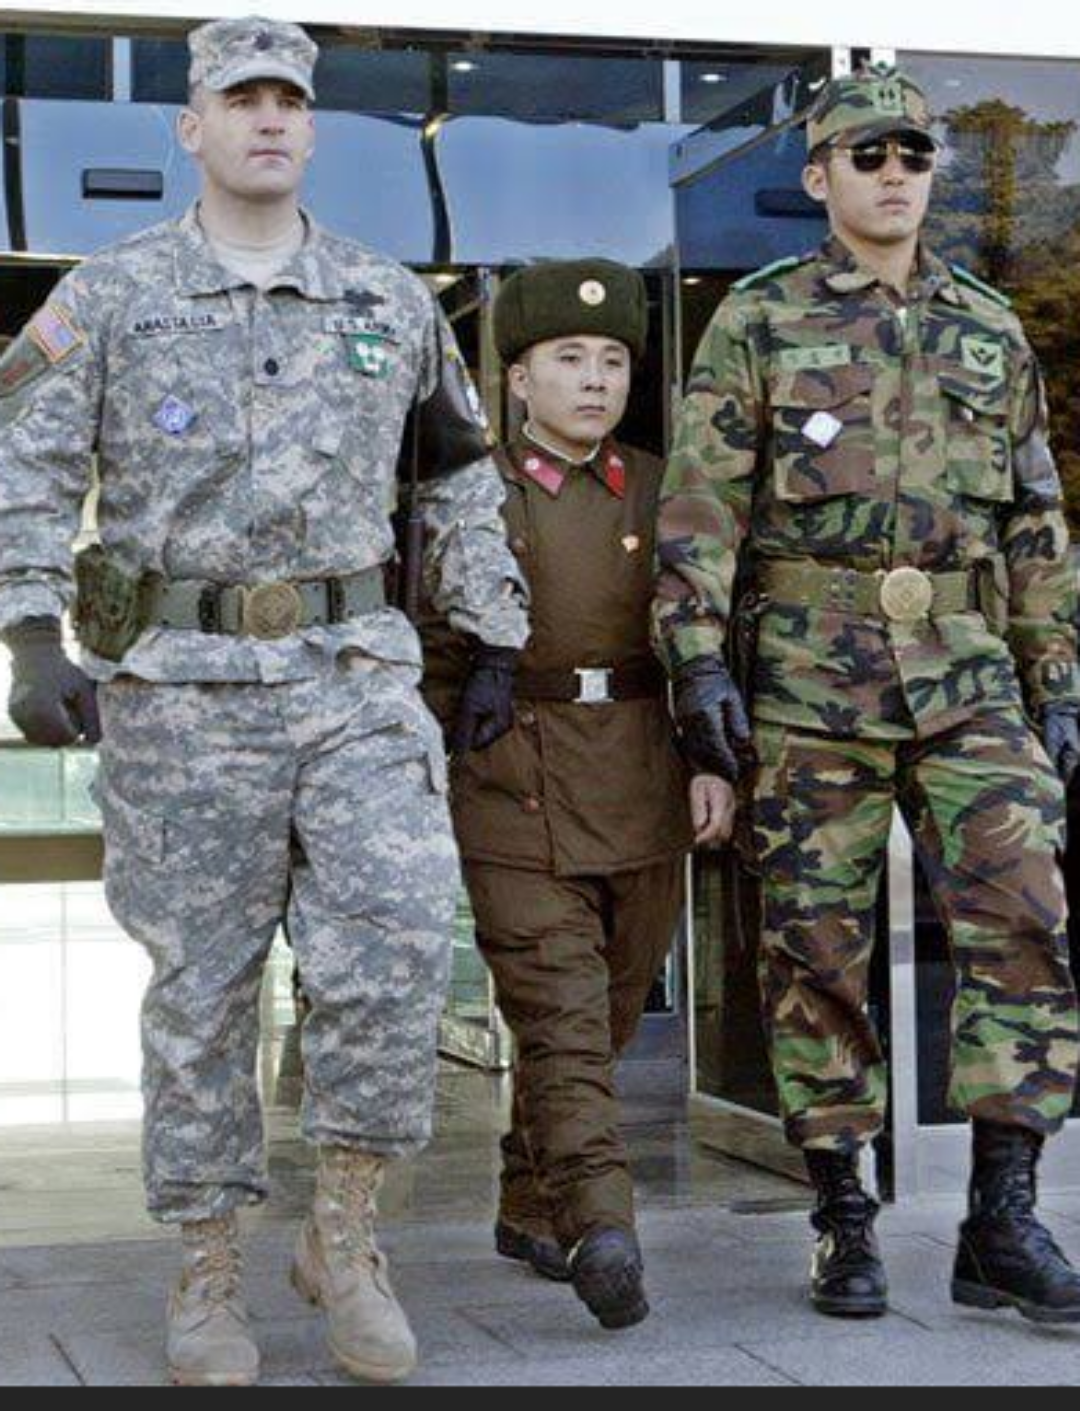 North Korea sending their smallest soldier to troll the trolls and hide their super tall super soacker soldiers for the great attack.